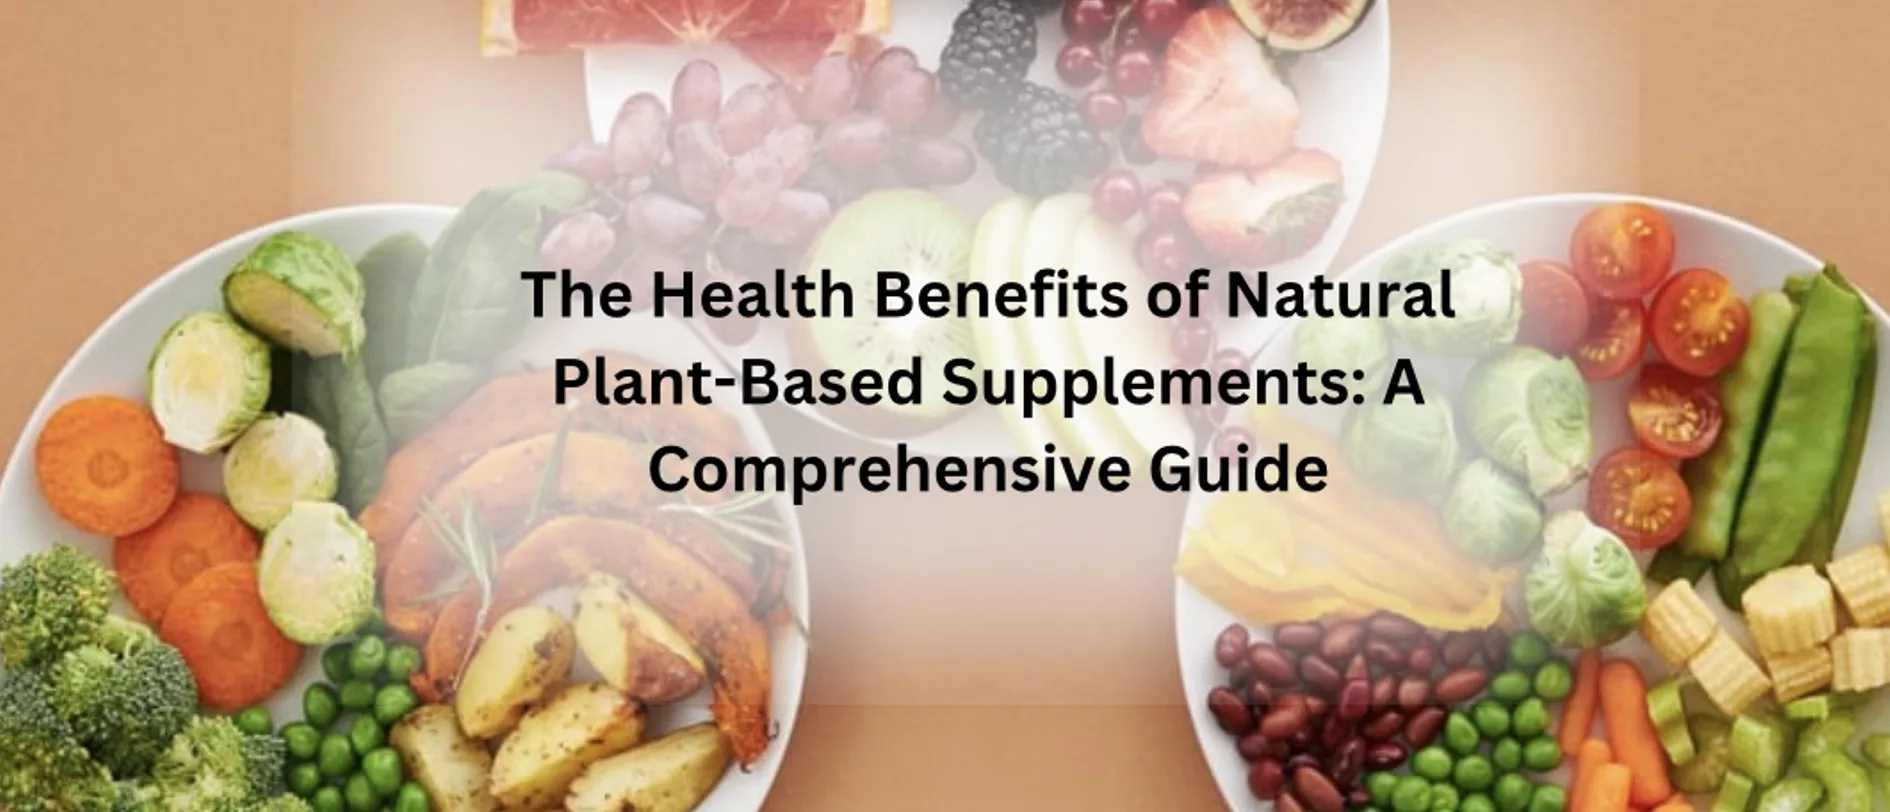 plant based supplements image